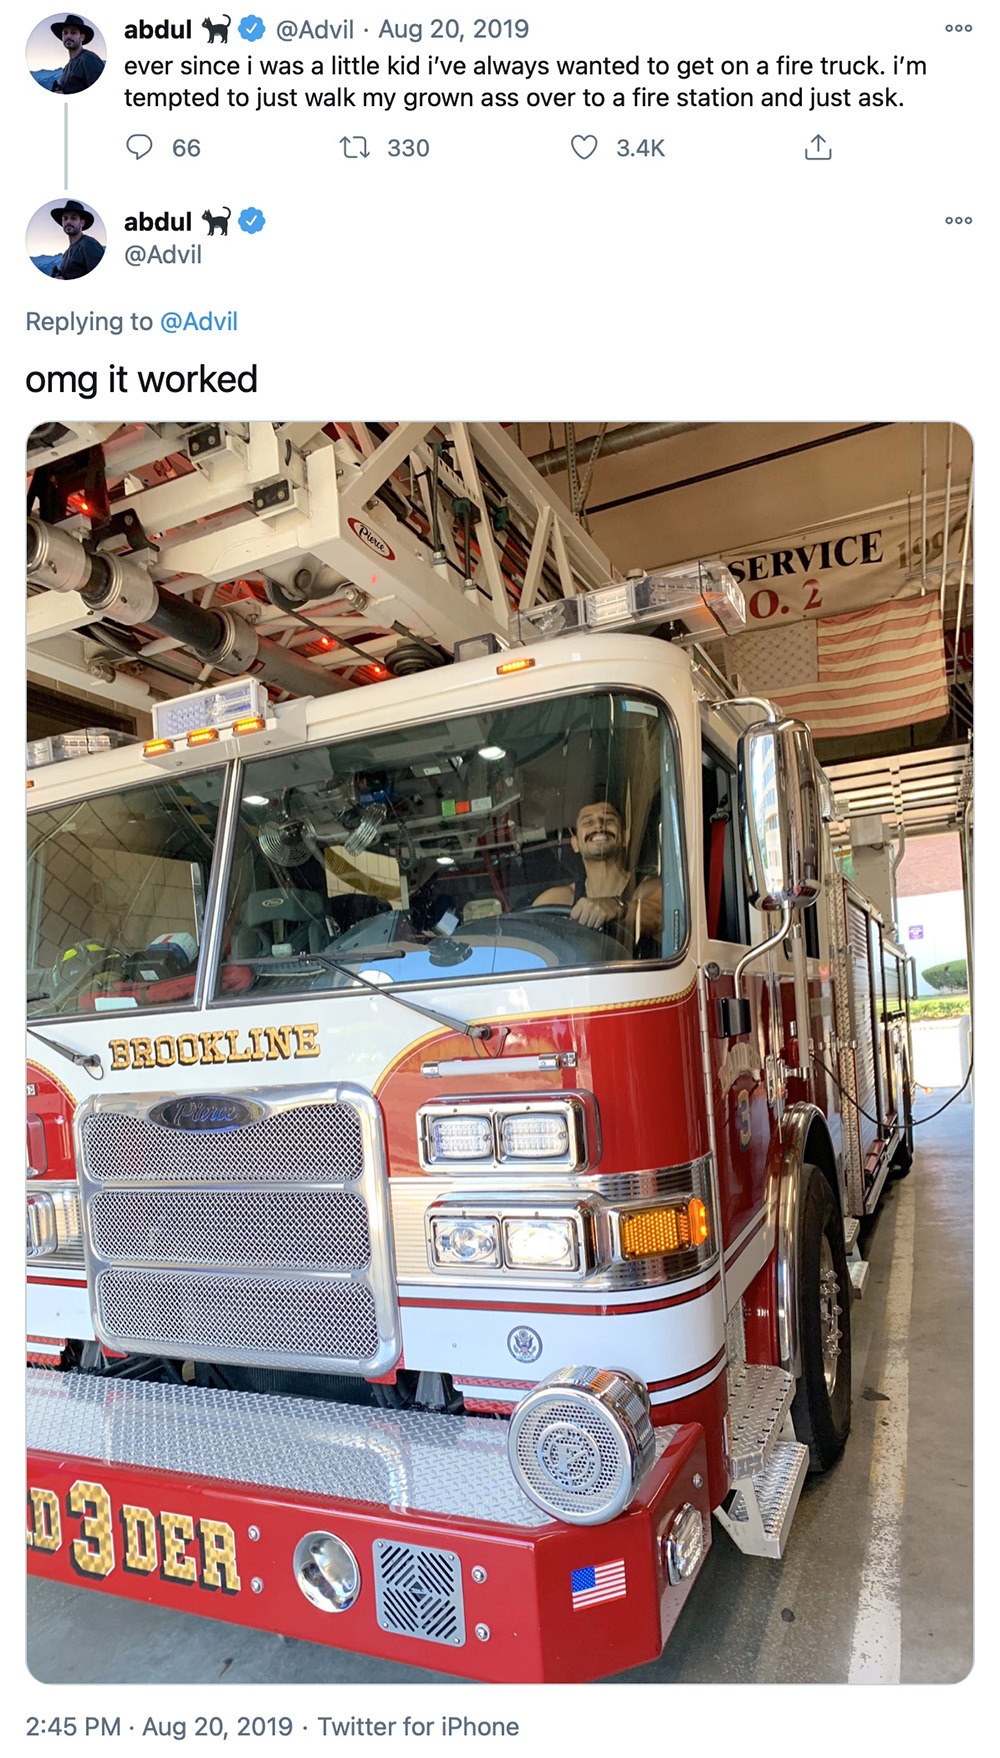 Man sitting behind the wheel of a big fire truck... the caption is: Ever since i was a little kid i’ve always wanted to get on a fire truck. i’m tempted to just walk my grown ass over to a fire station and just ask.